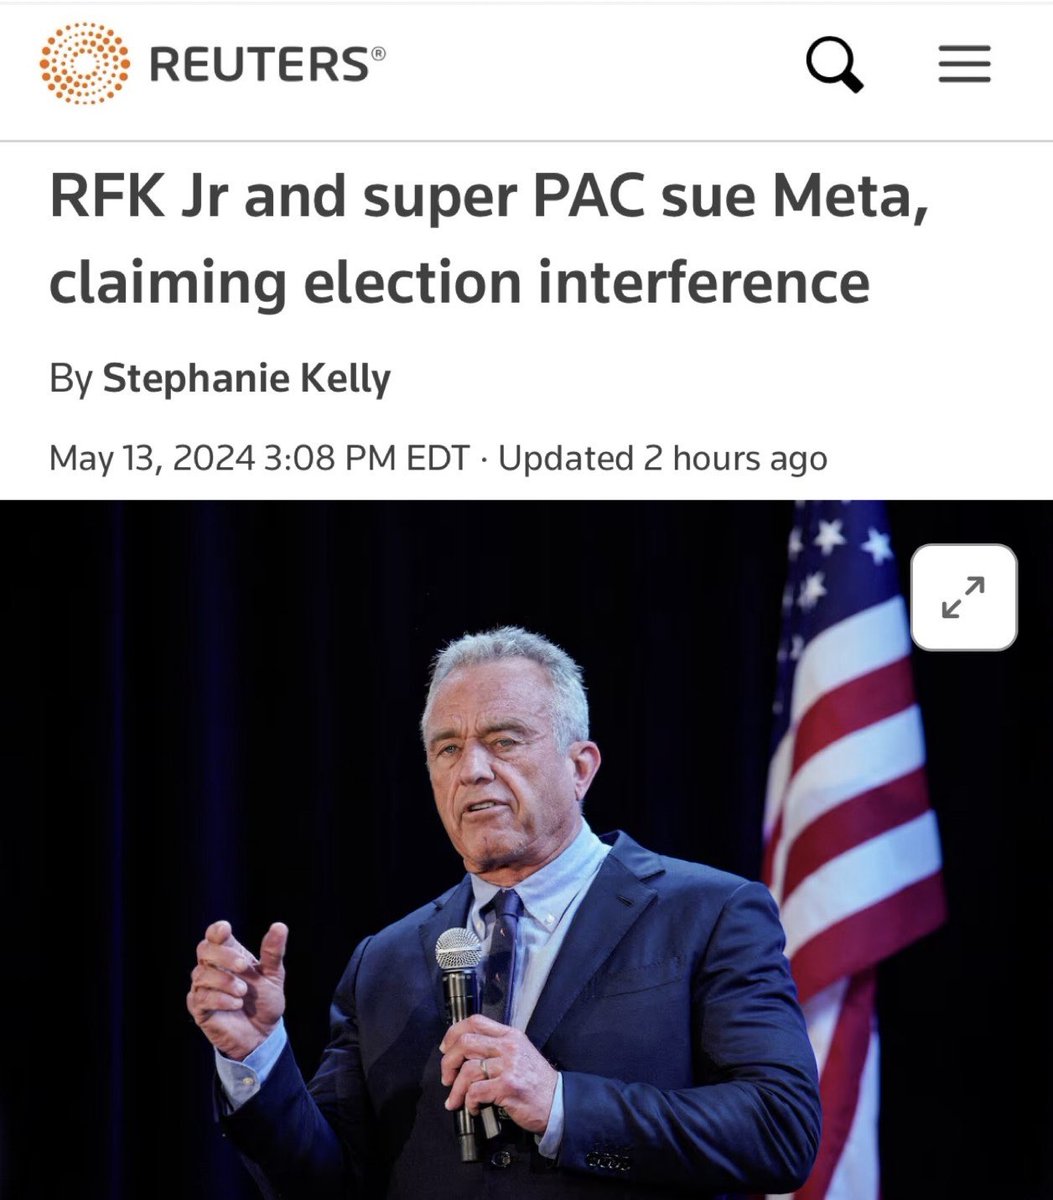 RFK Jr. and super PAC American Values 2024 officially file lawsuit against Meta for censoring ‘Who is Bobby Kennedy?’ documentary The lawsuit states: “Defendants seem to believe that they can with legal impunity issue threats to their users and deploy their vast power of